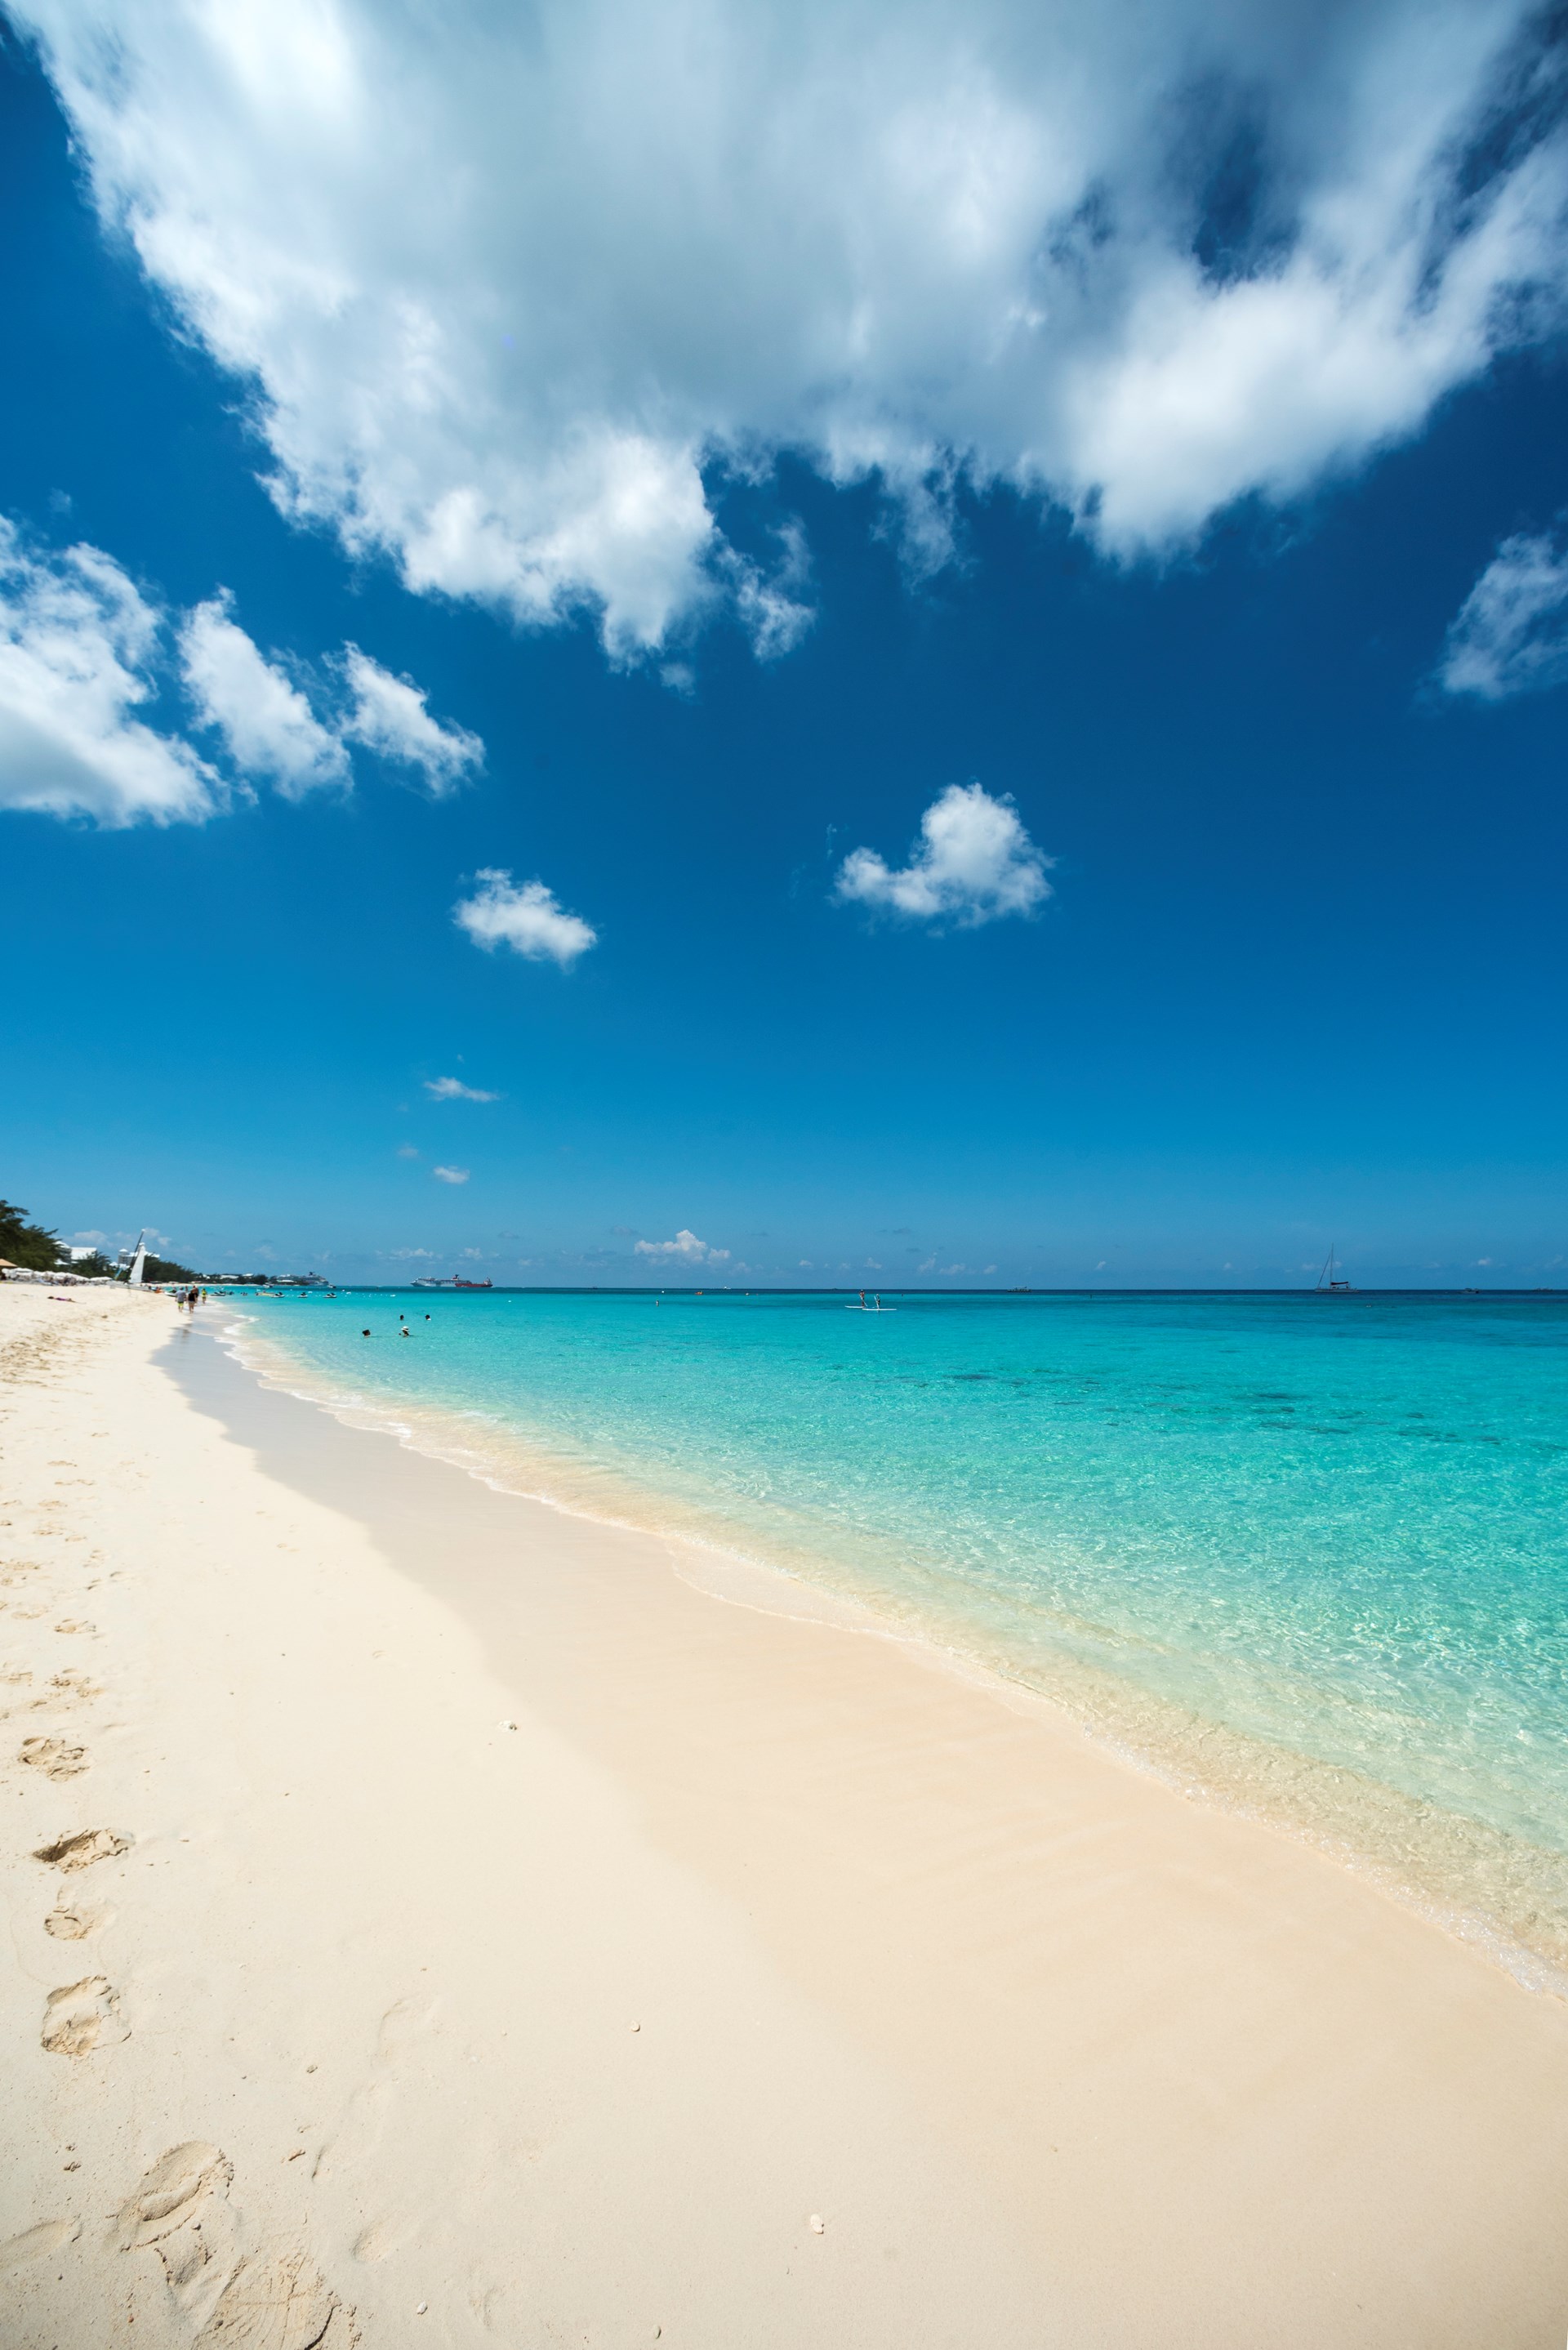 How to register a business in the Cayman Islands